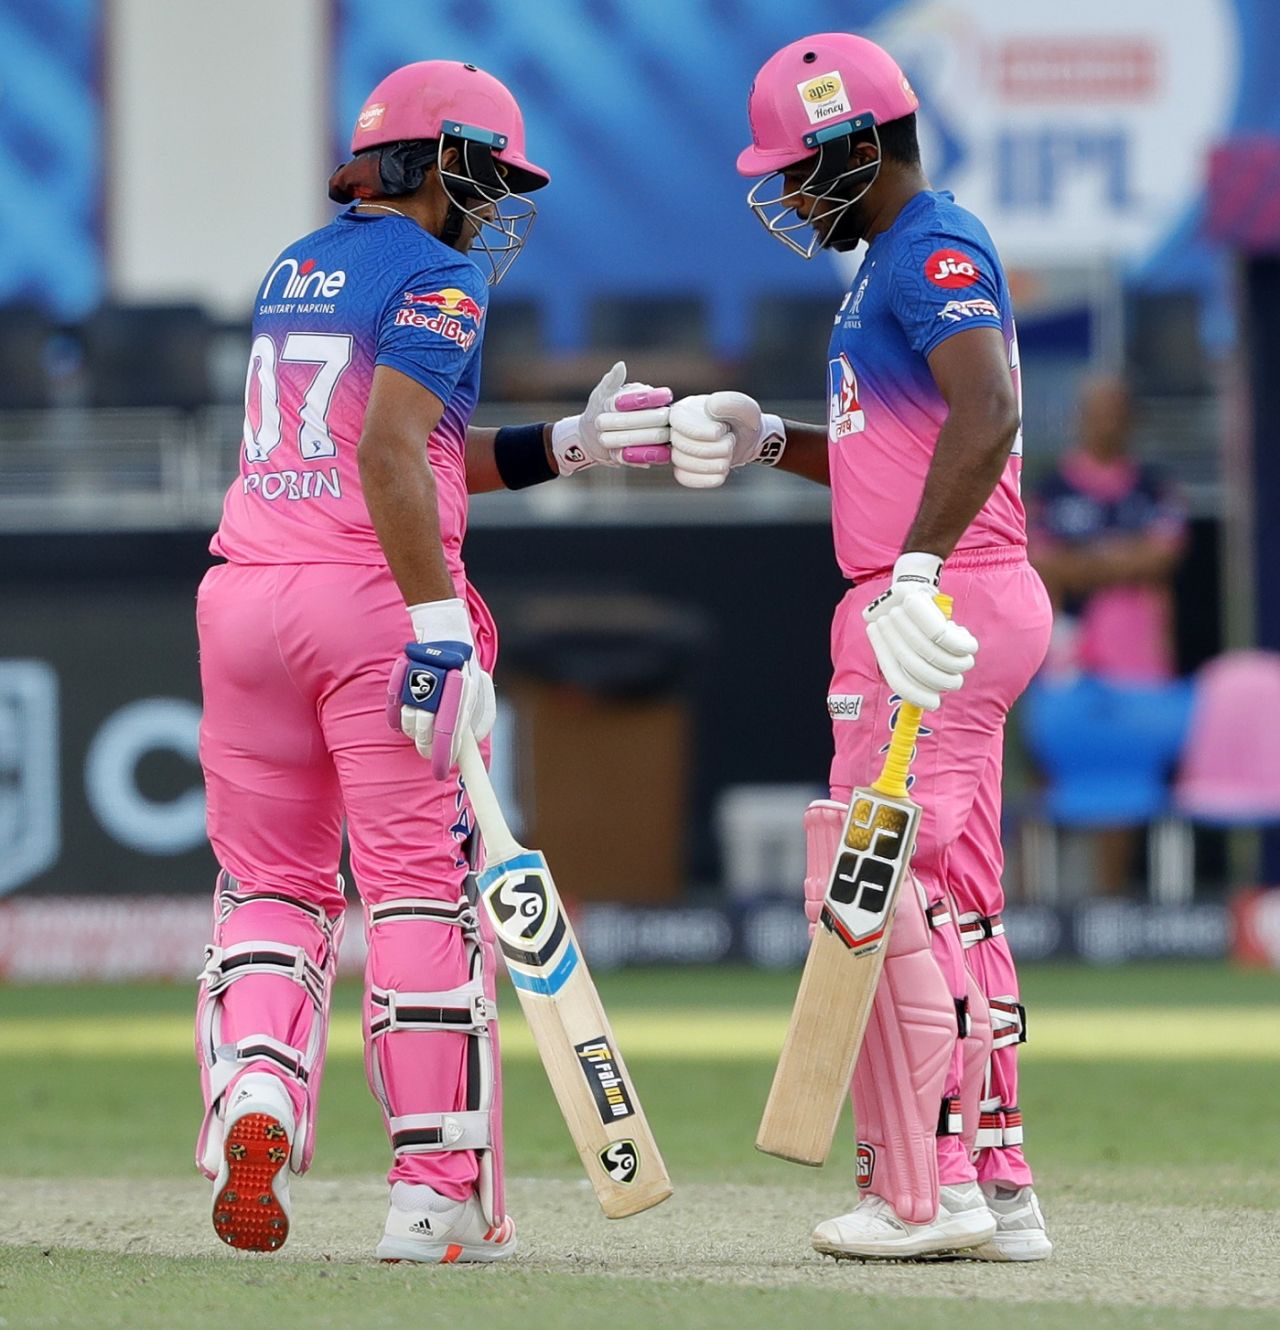 Robin Uthappa and Sanju Samson picked up the pieces after the early losses, Sunrisers Hyderabad vs Rajasthan Royals, IPL 2020, Dubai, October 11, 2020